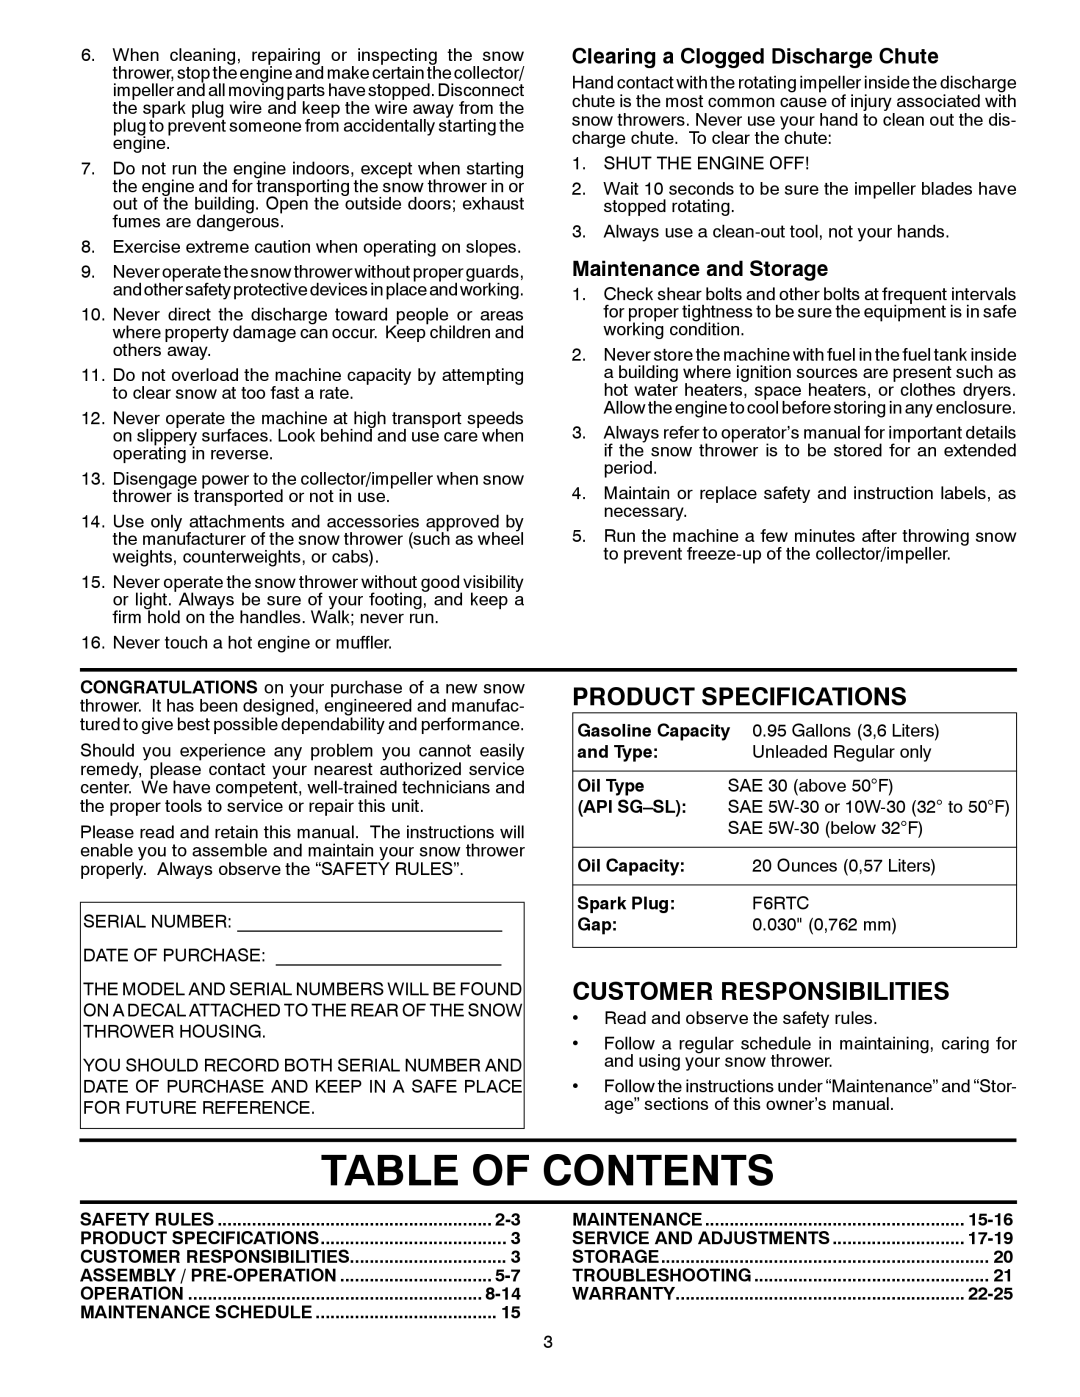 Husqvarna ST 327P Table Of Contents, Product Specifications, Customer Responsibilities, Clearing a Clogged Discharge Chute 